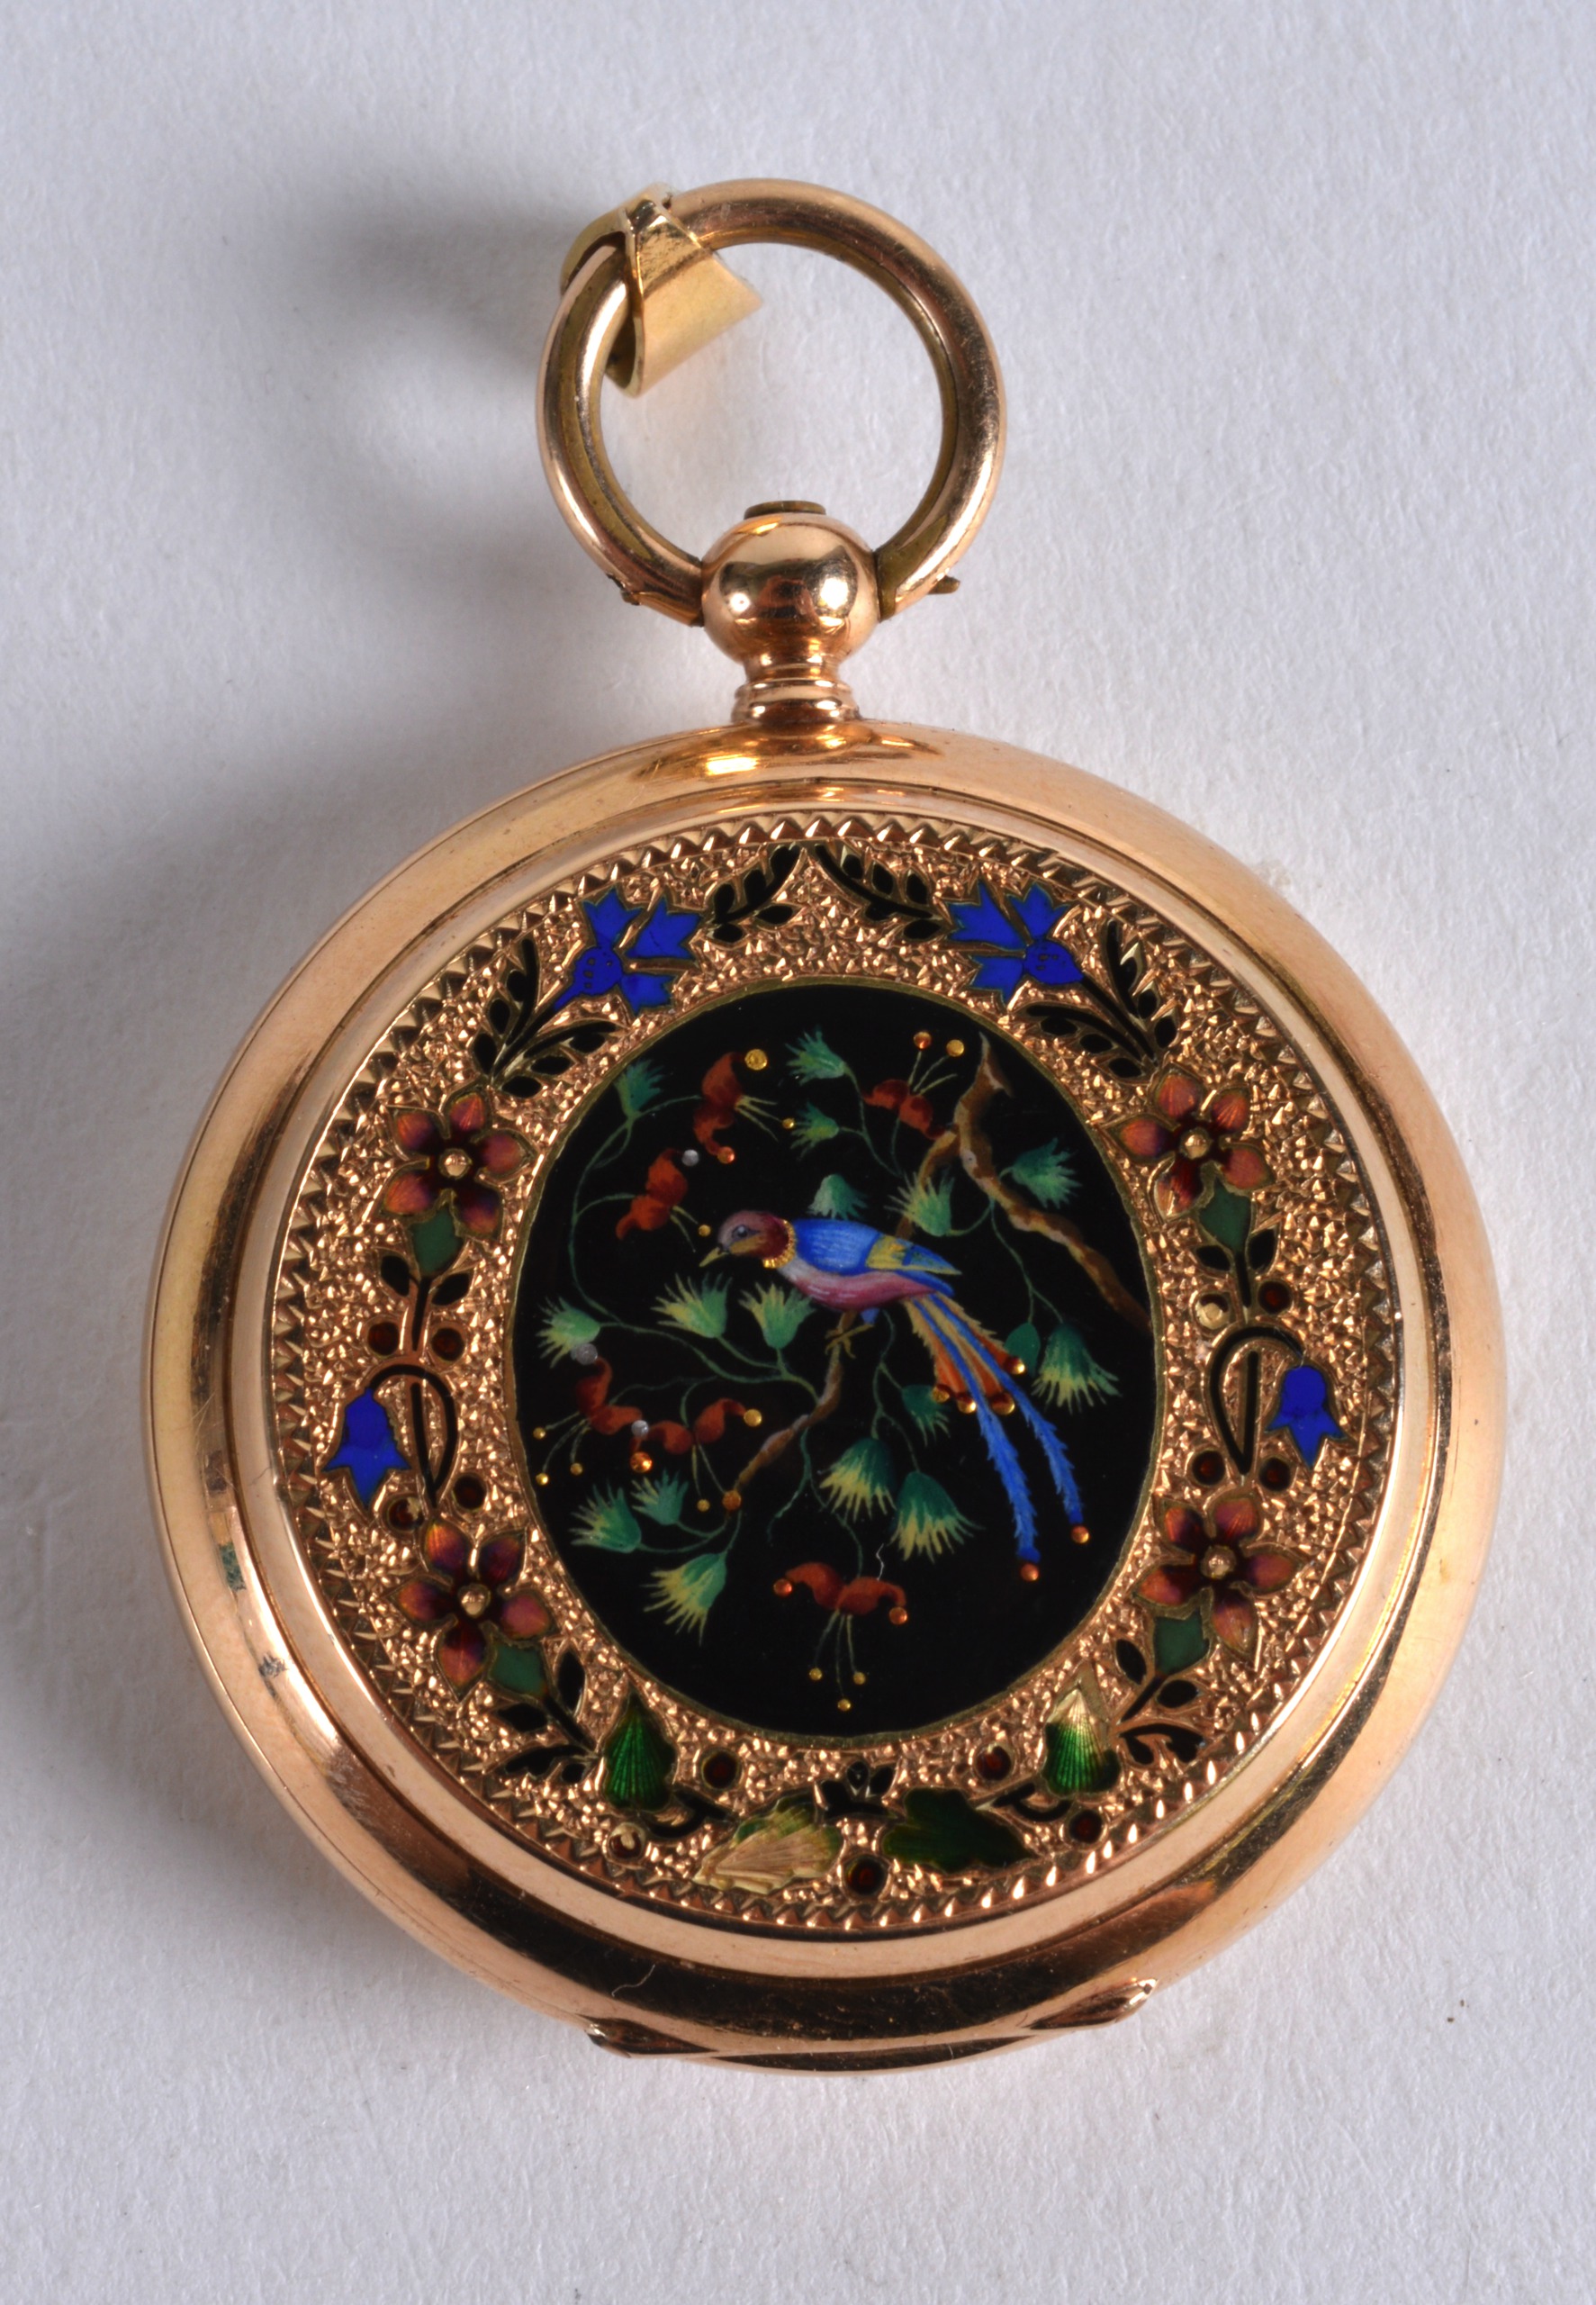 A FINE EARLY 20TH CENTURY 9CT GOLD AND ENAMEL VIENNA LADIES WATCH in a fitted case, wonderfully